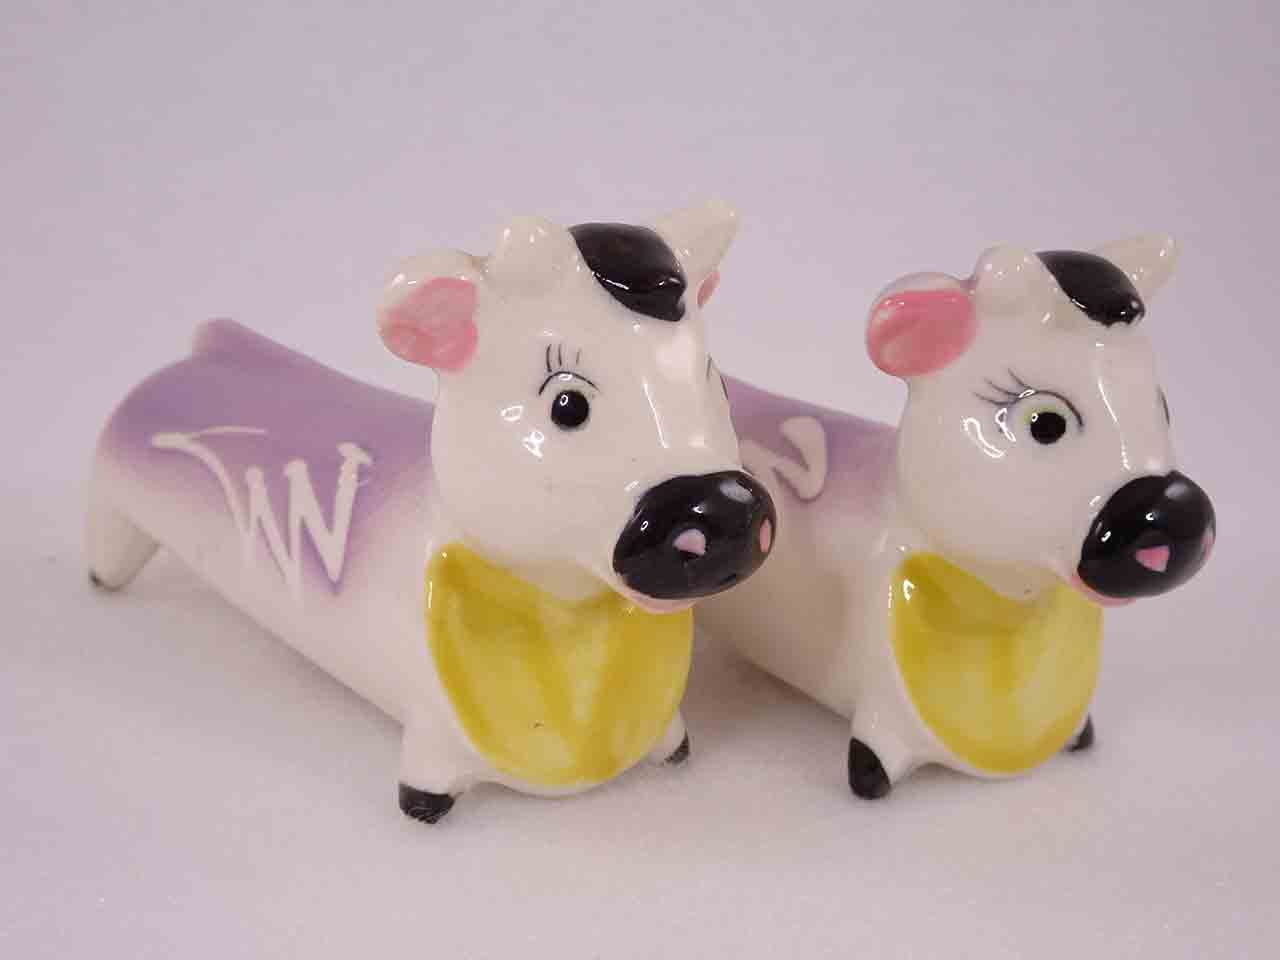 Longer Animals with White Squiggly Lines salt and pepper shakers - cows